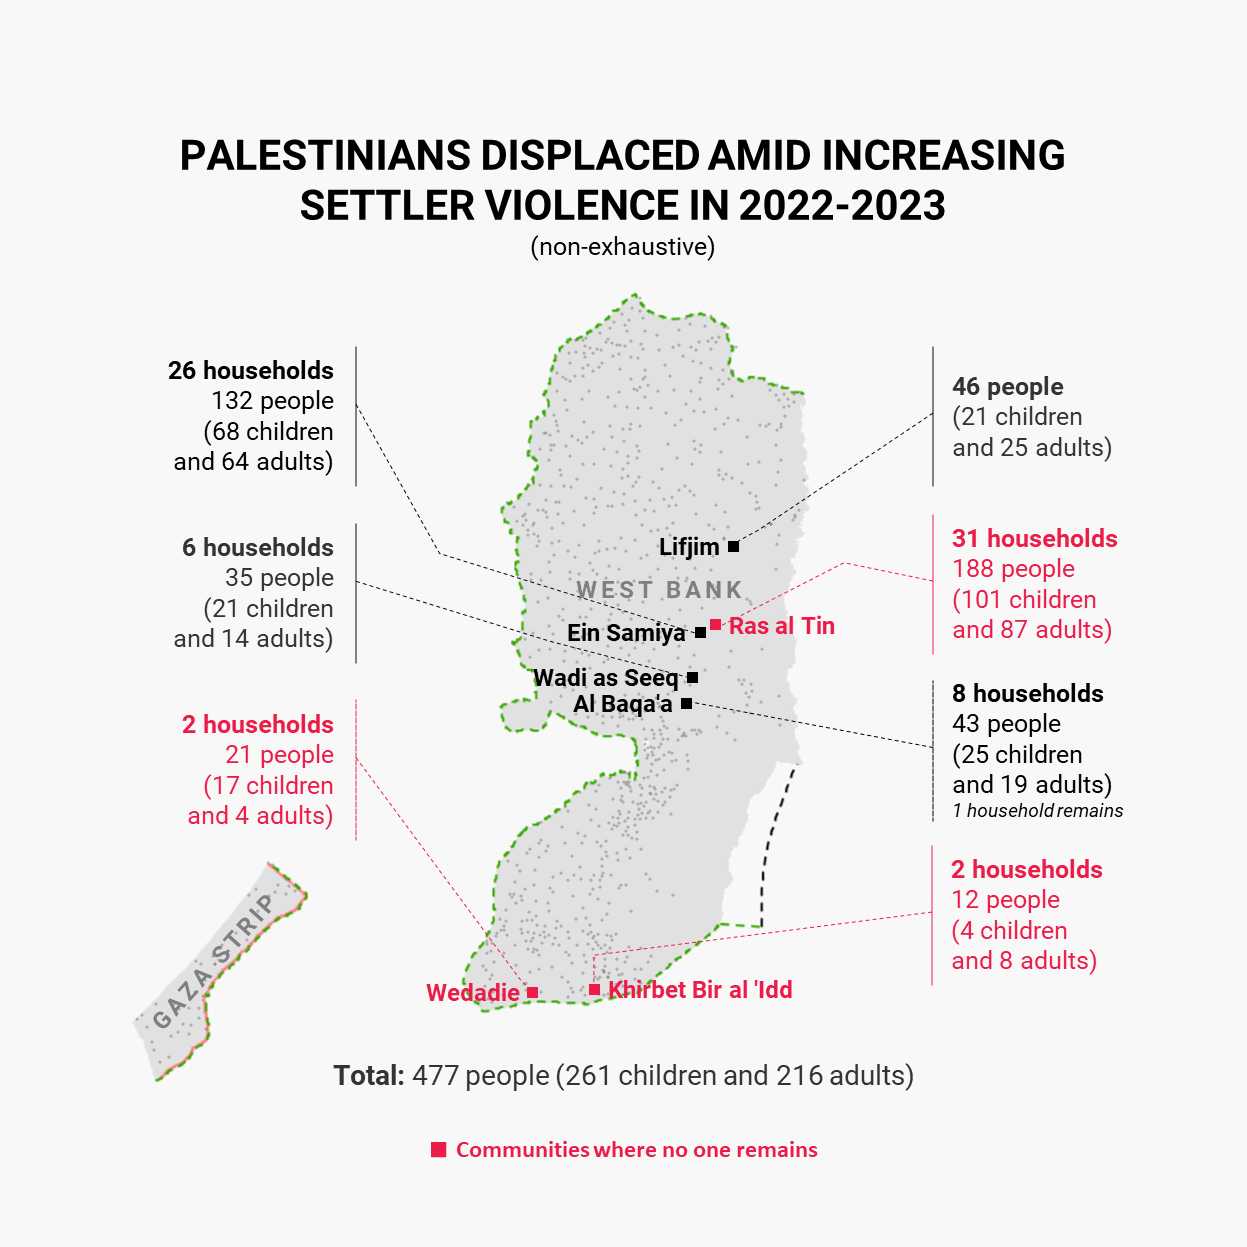 Attributable to Andrea De Domenico, Head of OCHA in the occupied Palestinian territory: “The displacement of Palestinians amid increasing settler violence is of a magnitude that we have not previously documented. We’ve been monitoring displacement in the West Bank for over 20 years, and it has typically been in the context of demolition by the Israeli authorities. “The United Nations and its humanitarian partners provide support to Palestinians displaced and otherwise affected by settler violence and other 